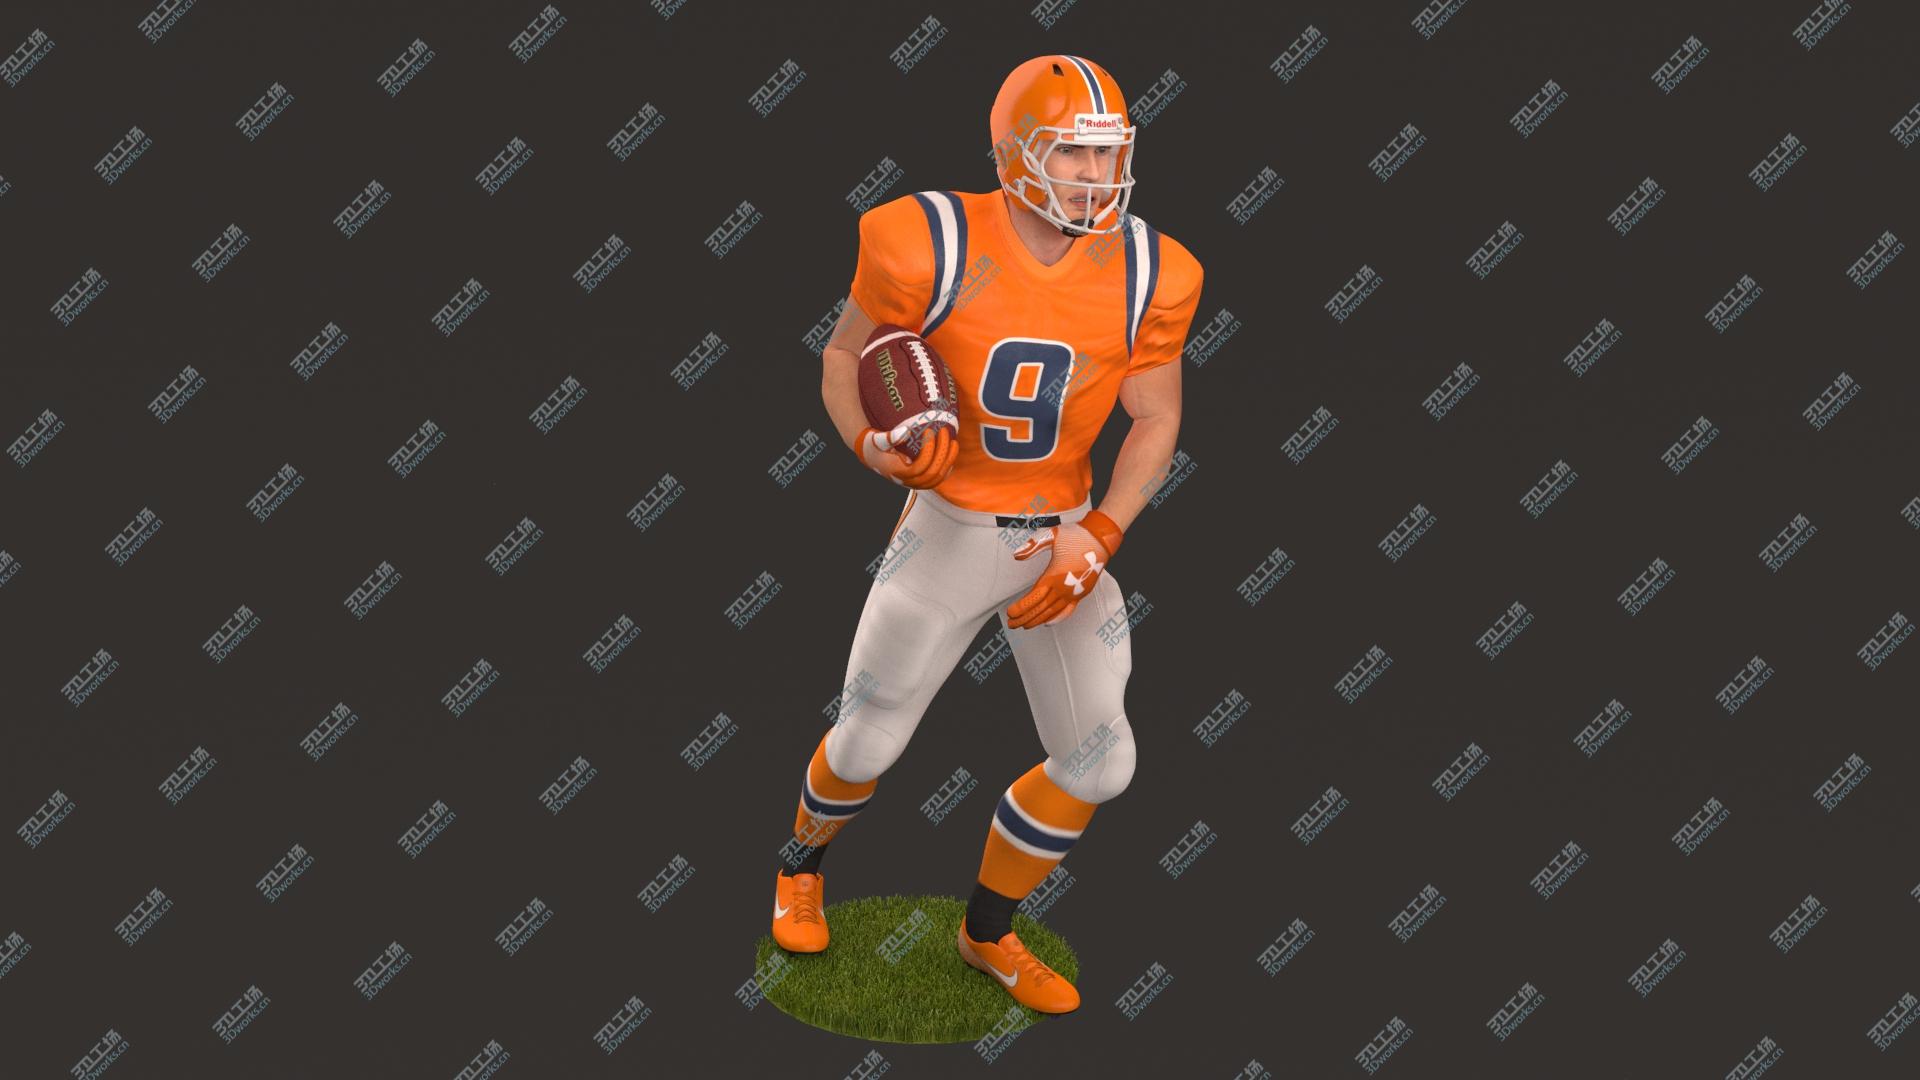 images/goods_img/20210313/3D American Football Player 2020 V6 Rigged/2.jpg